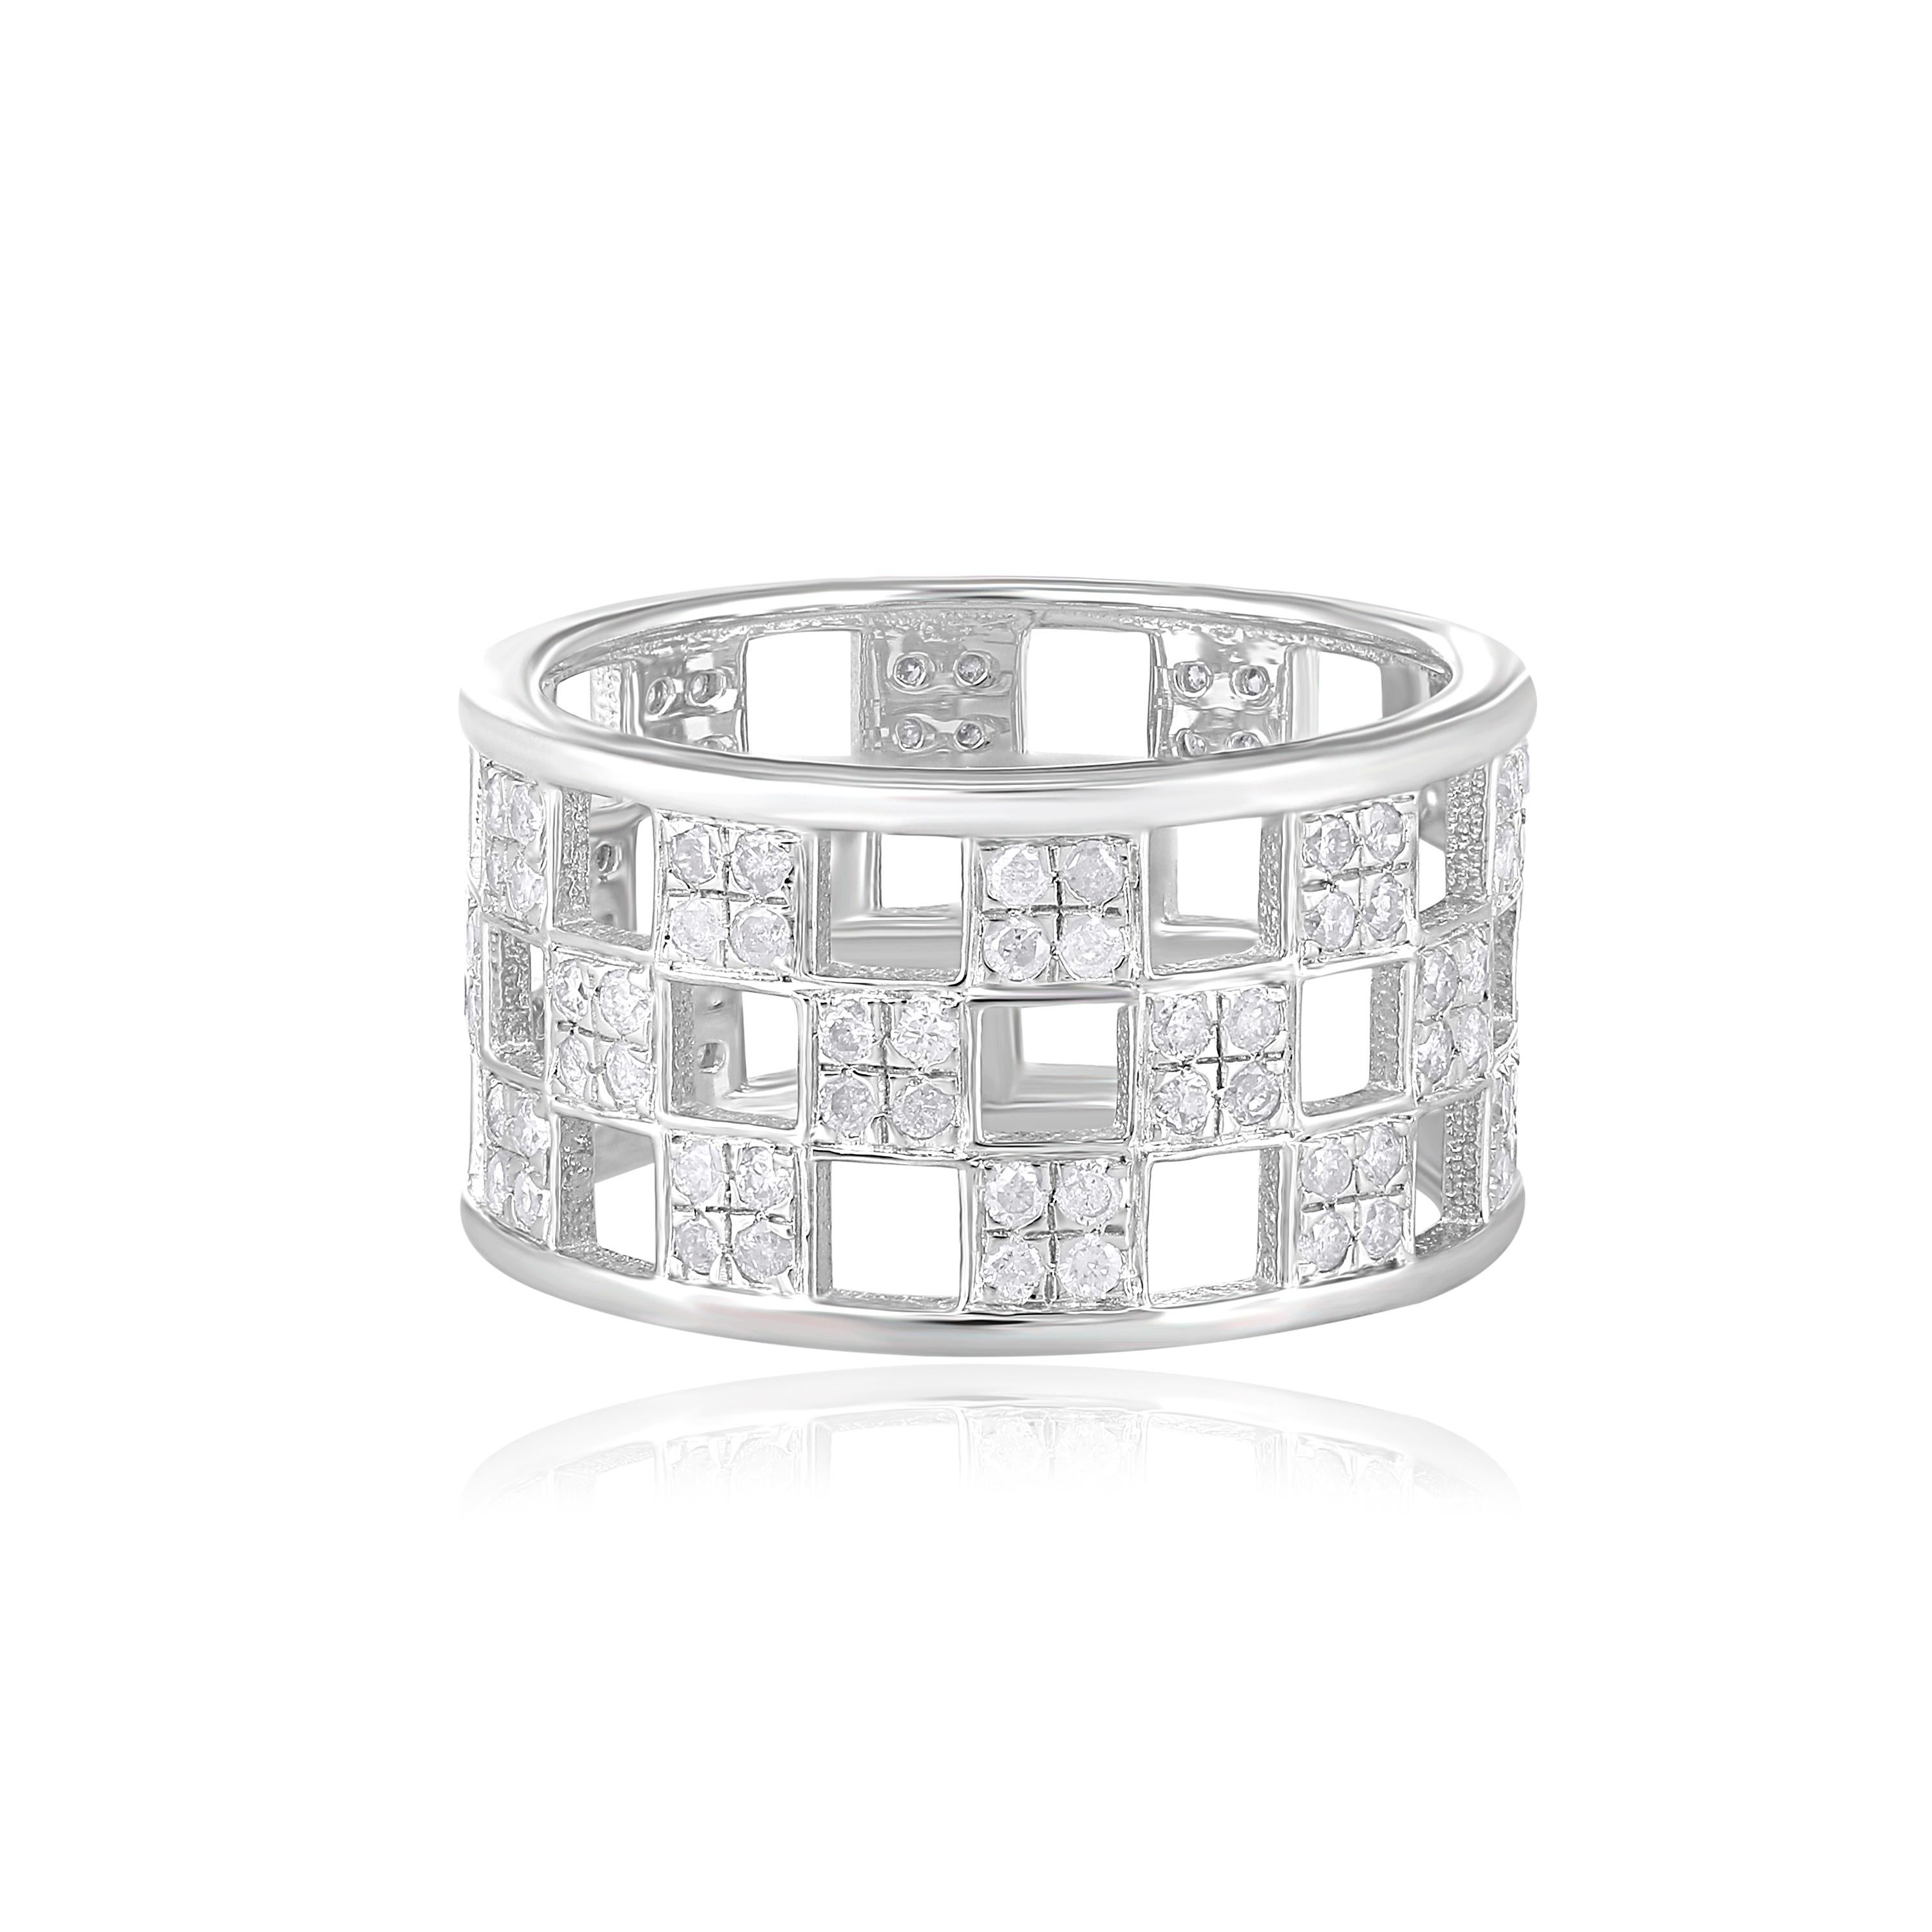 Round Cut Gemistry 1.07ct. T.W. Diamond Free Form Lattice Band Ring in 925 Sterling Silver For Sale